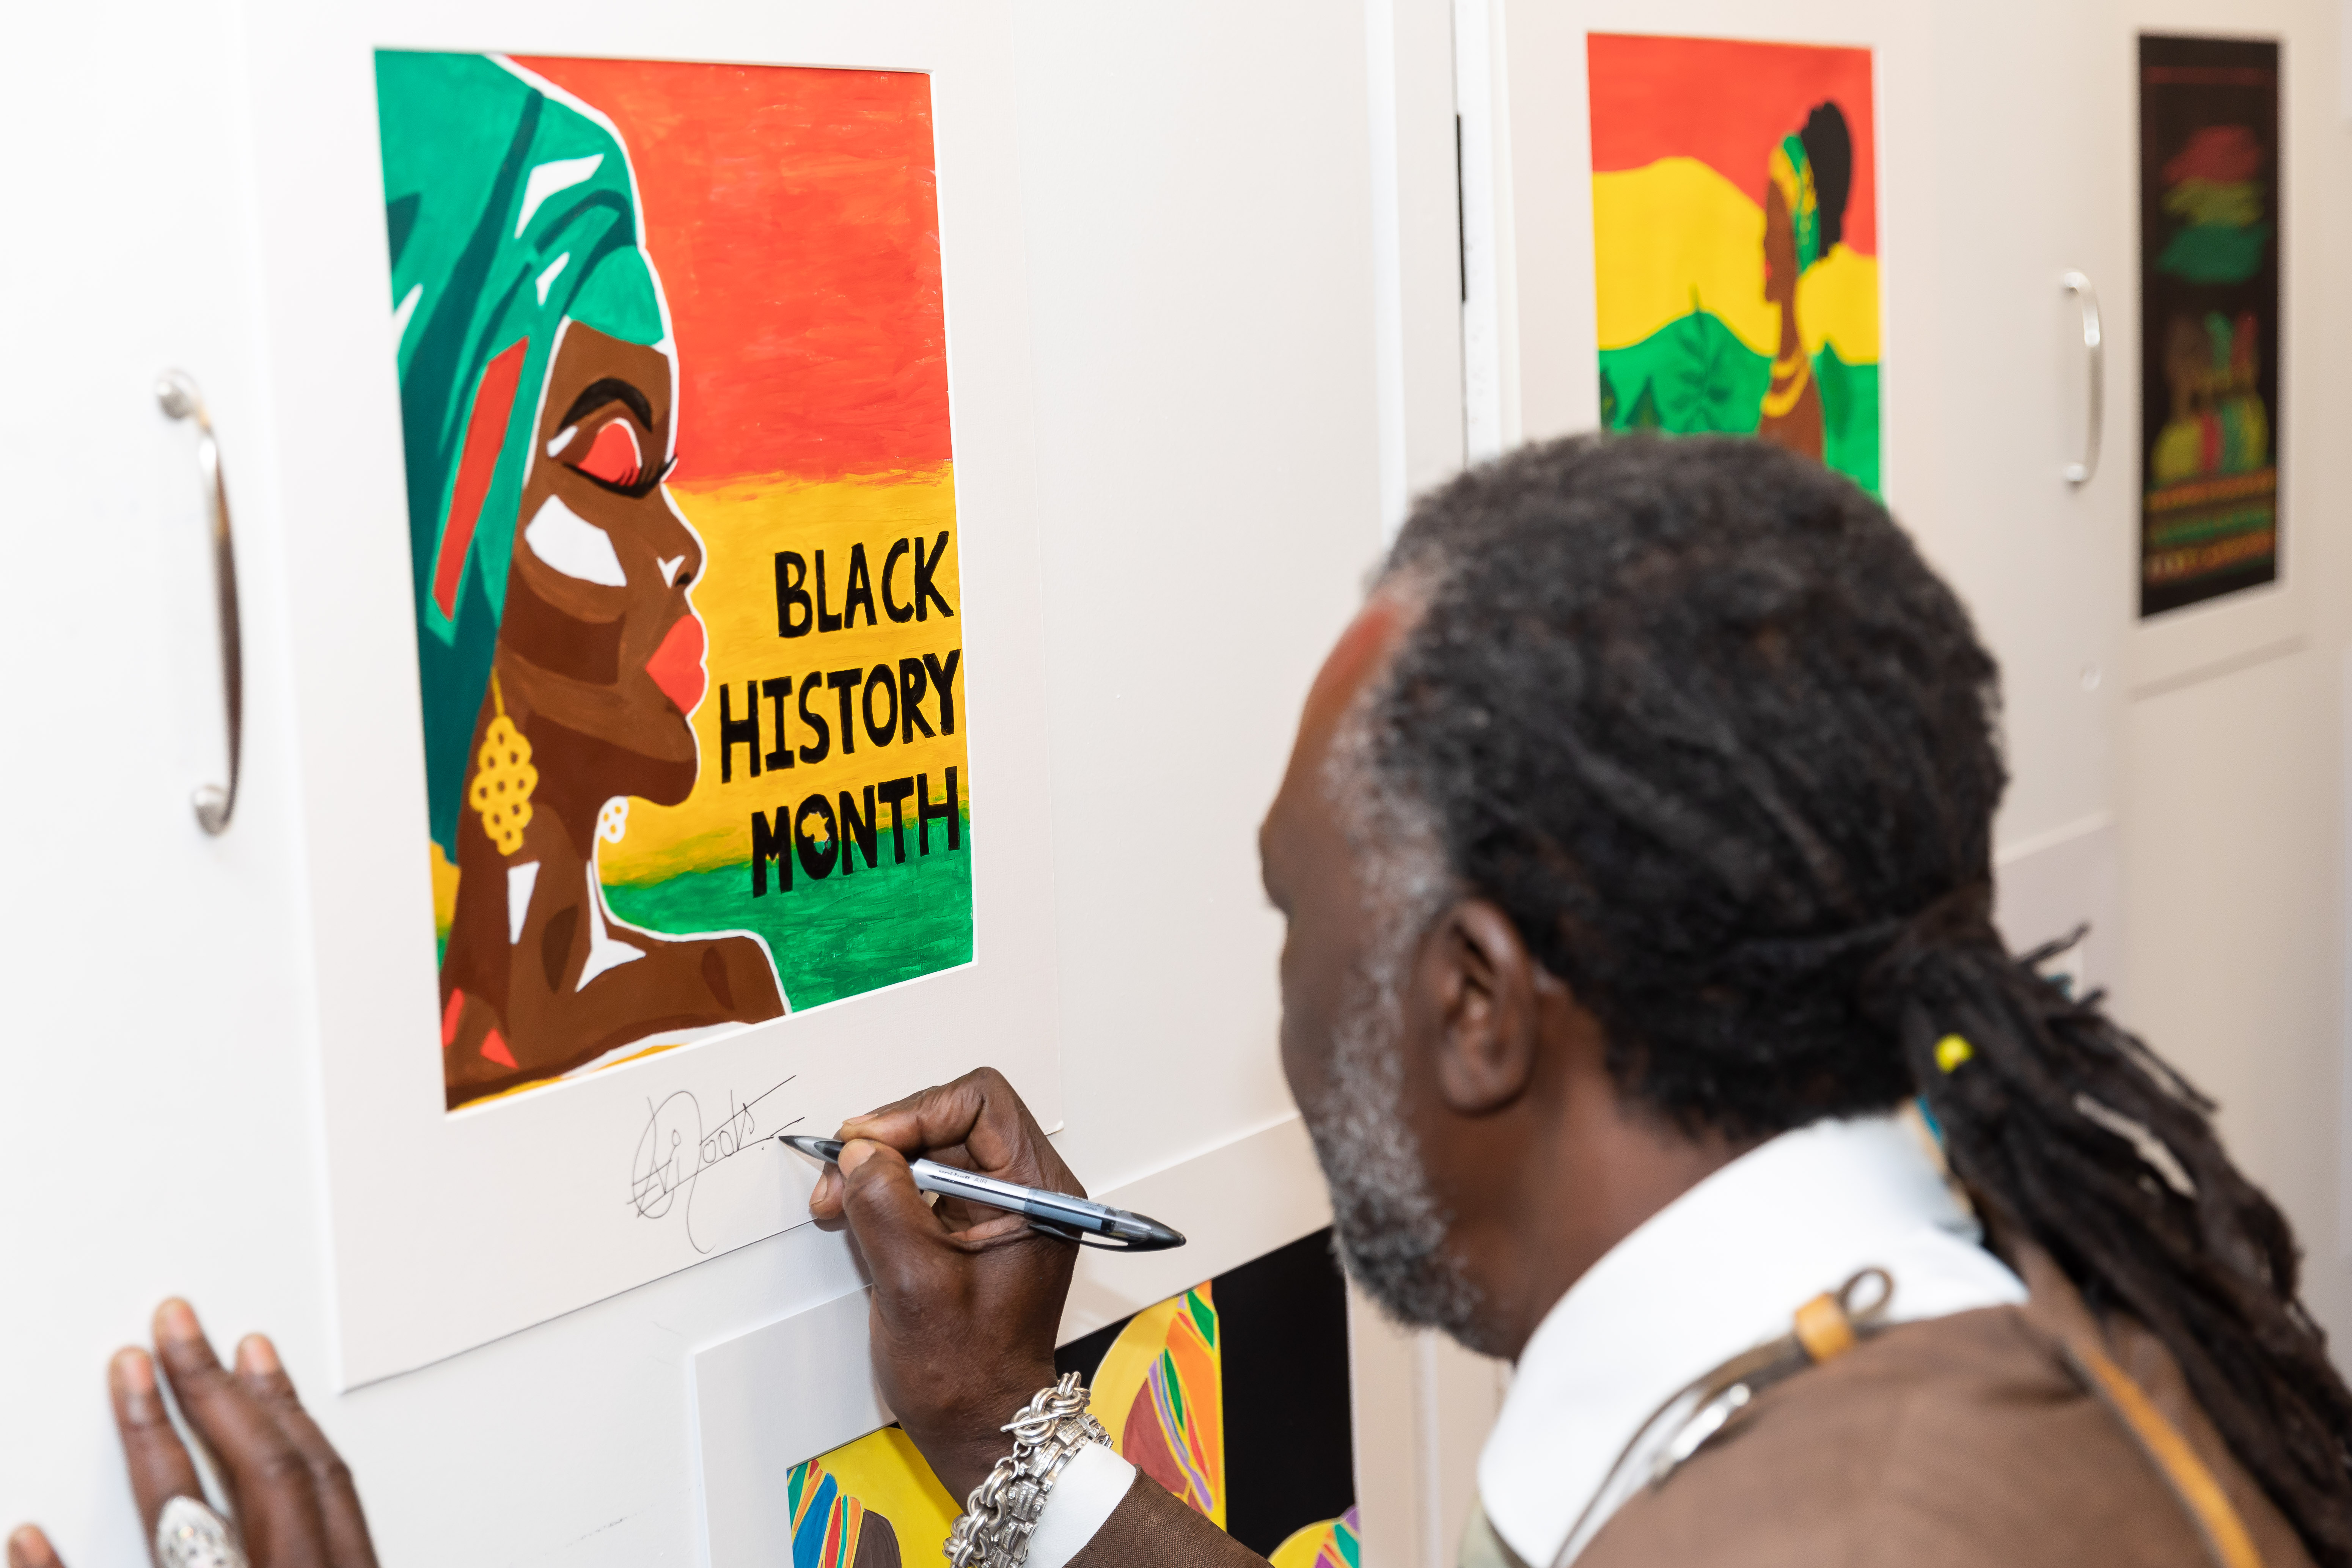 Levi signing some artwork created by Age UK Barnet for Black History Month